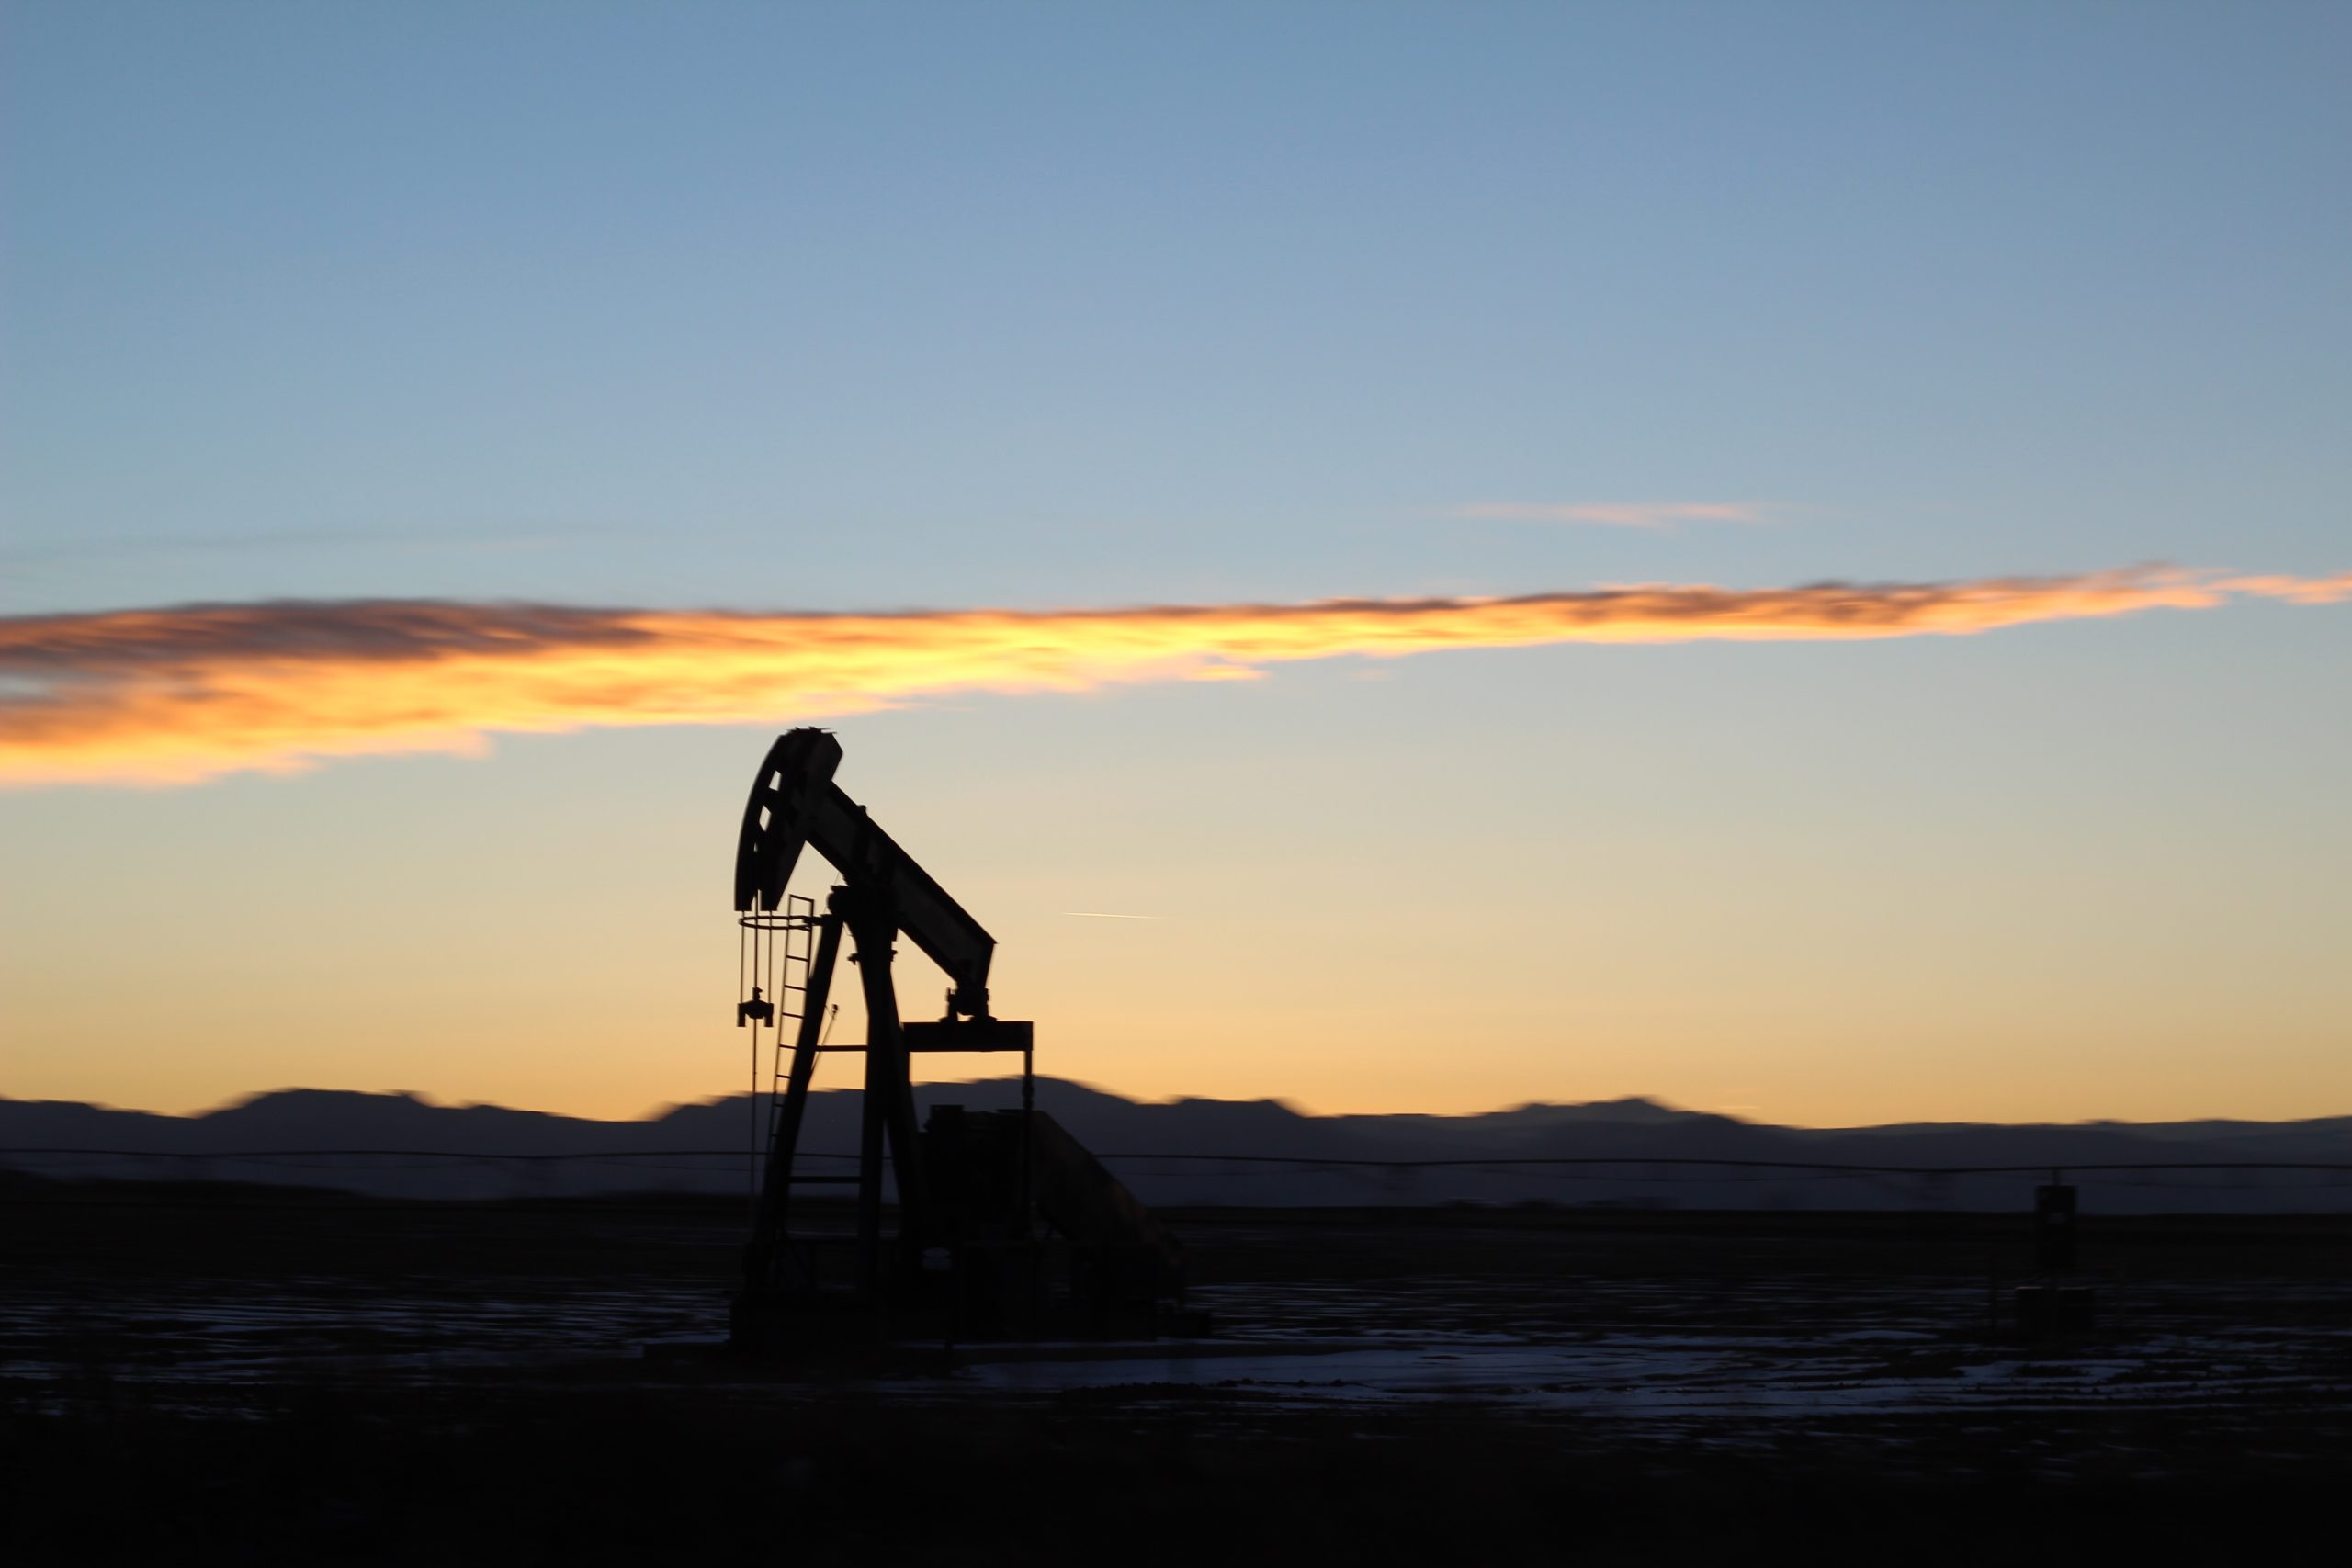 Oil drill. A look at Alaska, North Dakota, and Alberta oil markets, and the fallout for the Pacific Northwest, in the era of COVID-19.